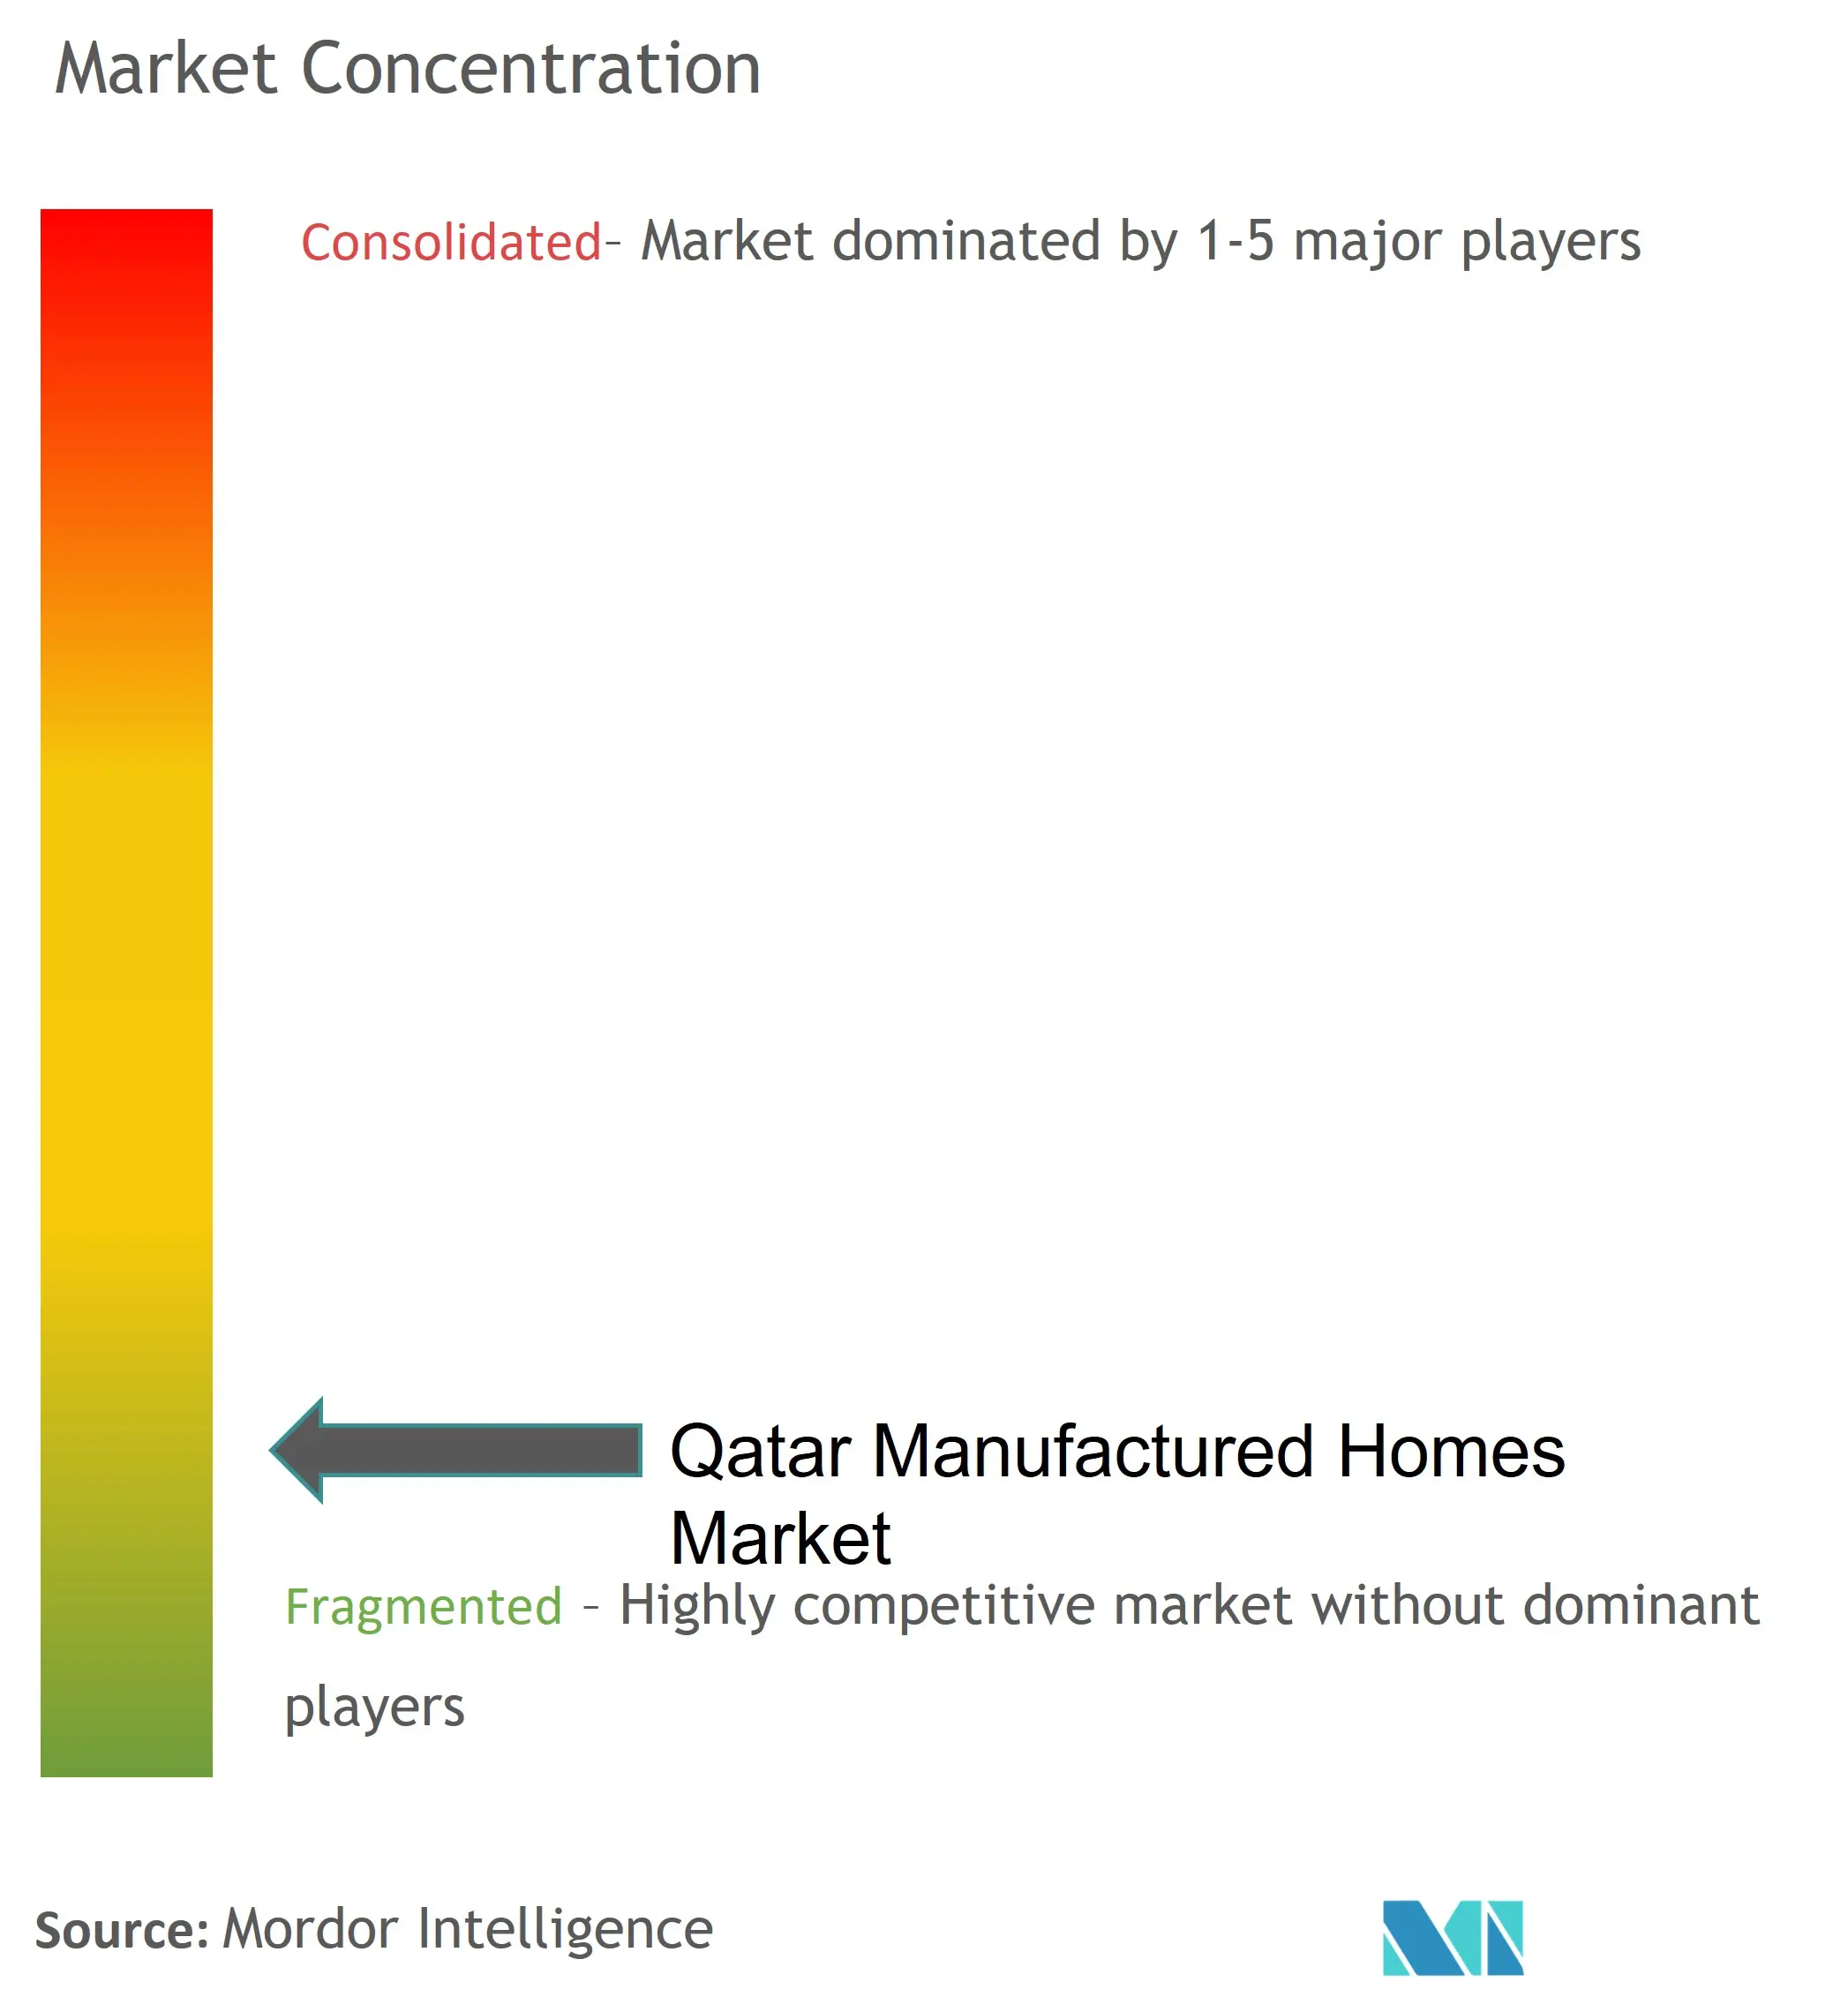 Qatar Manufactured Homes Market Concentration